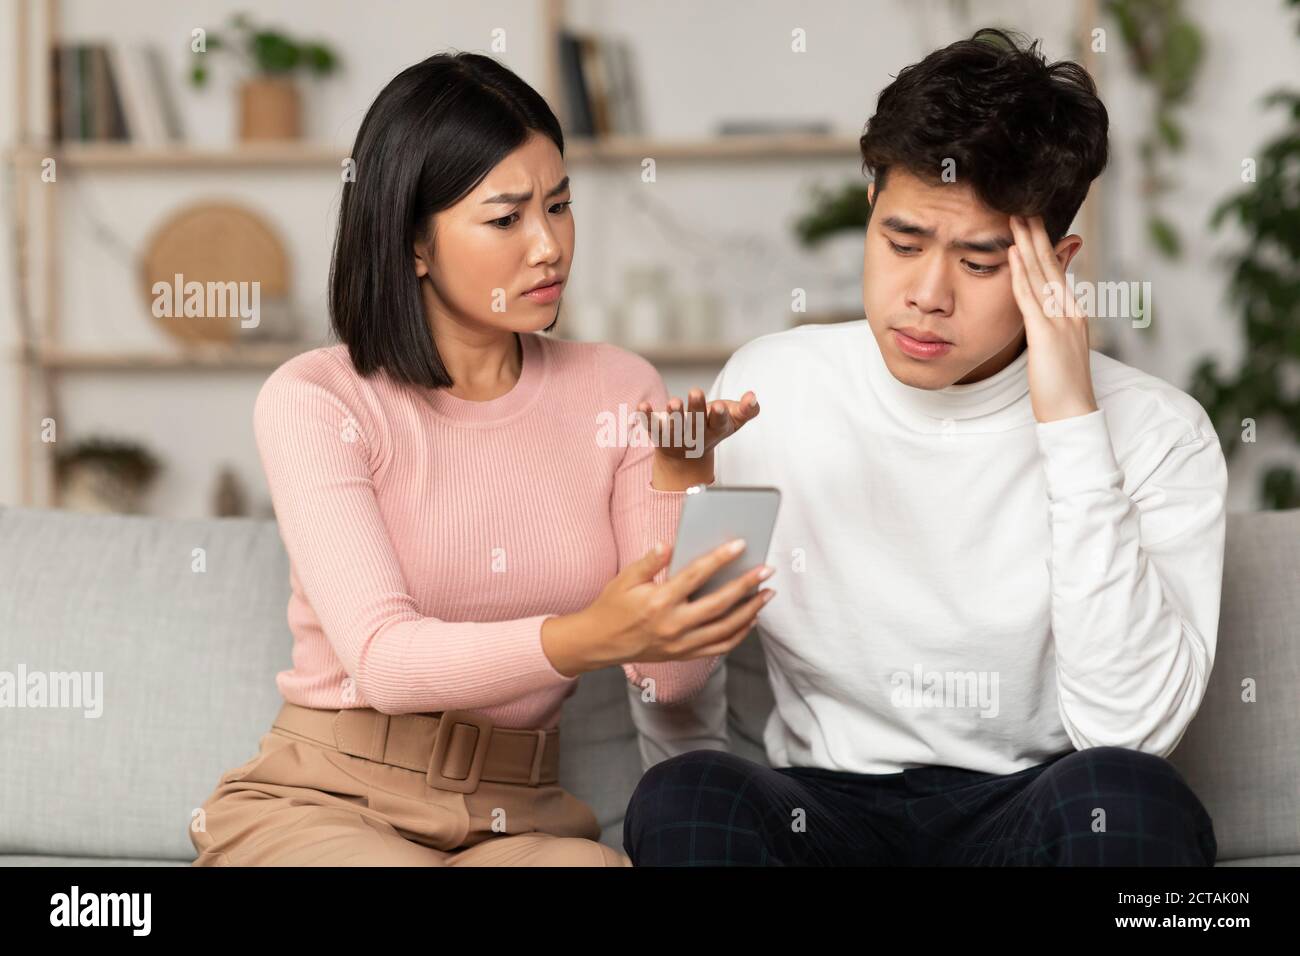 Asian Wife Showing Cheating Husband His Phone Suspecting Affair Indoors Stock Photo